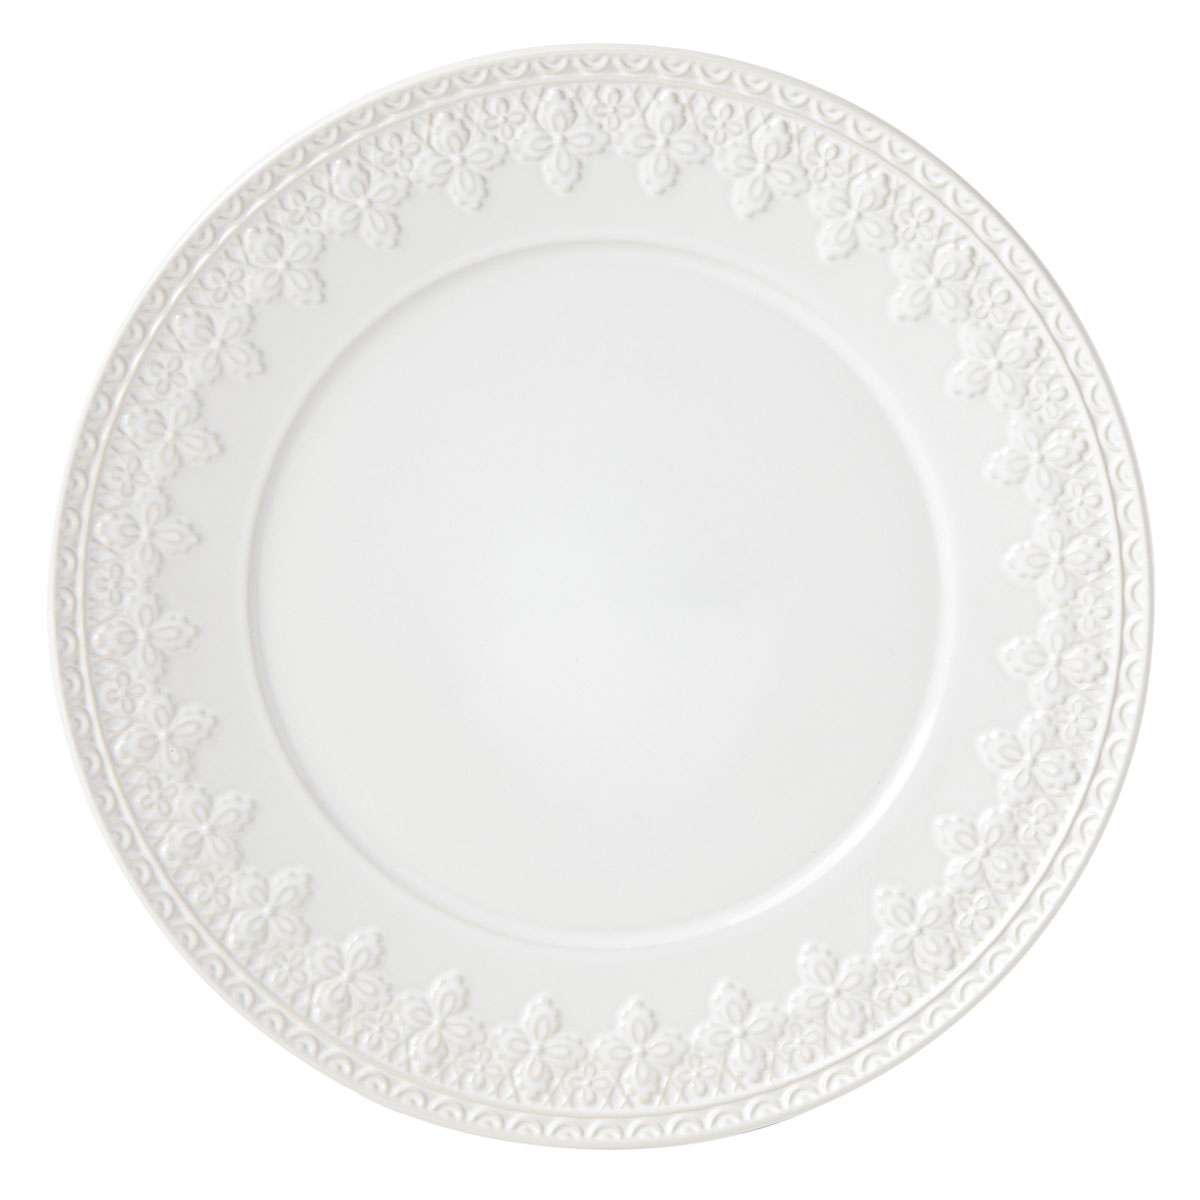 Lenox Chelse Muse China Fleur White Accent Plate